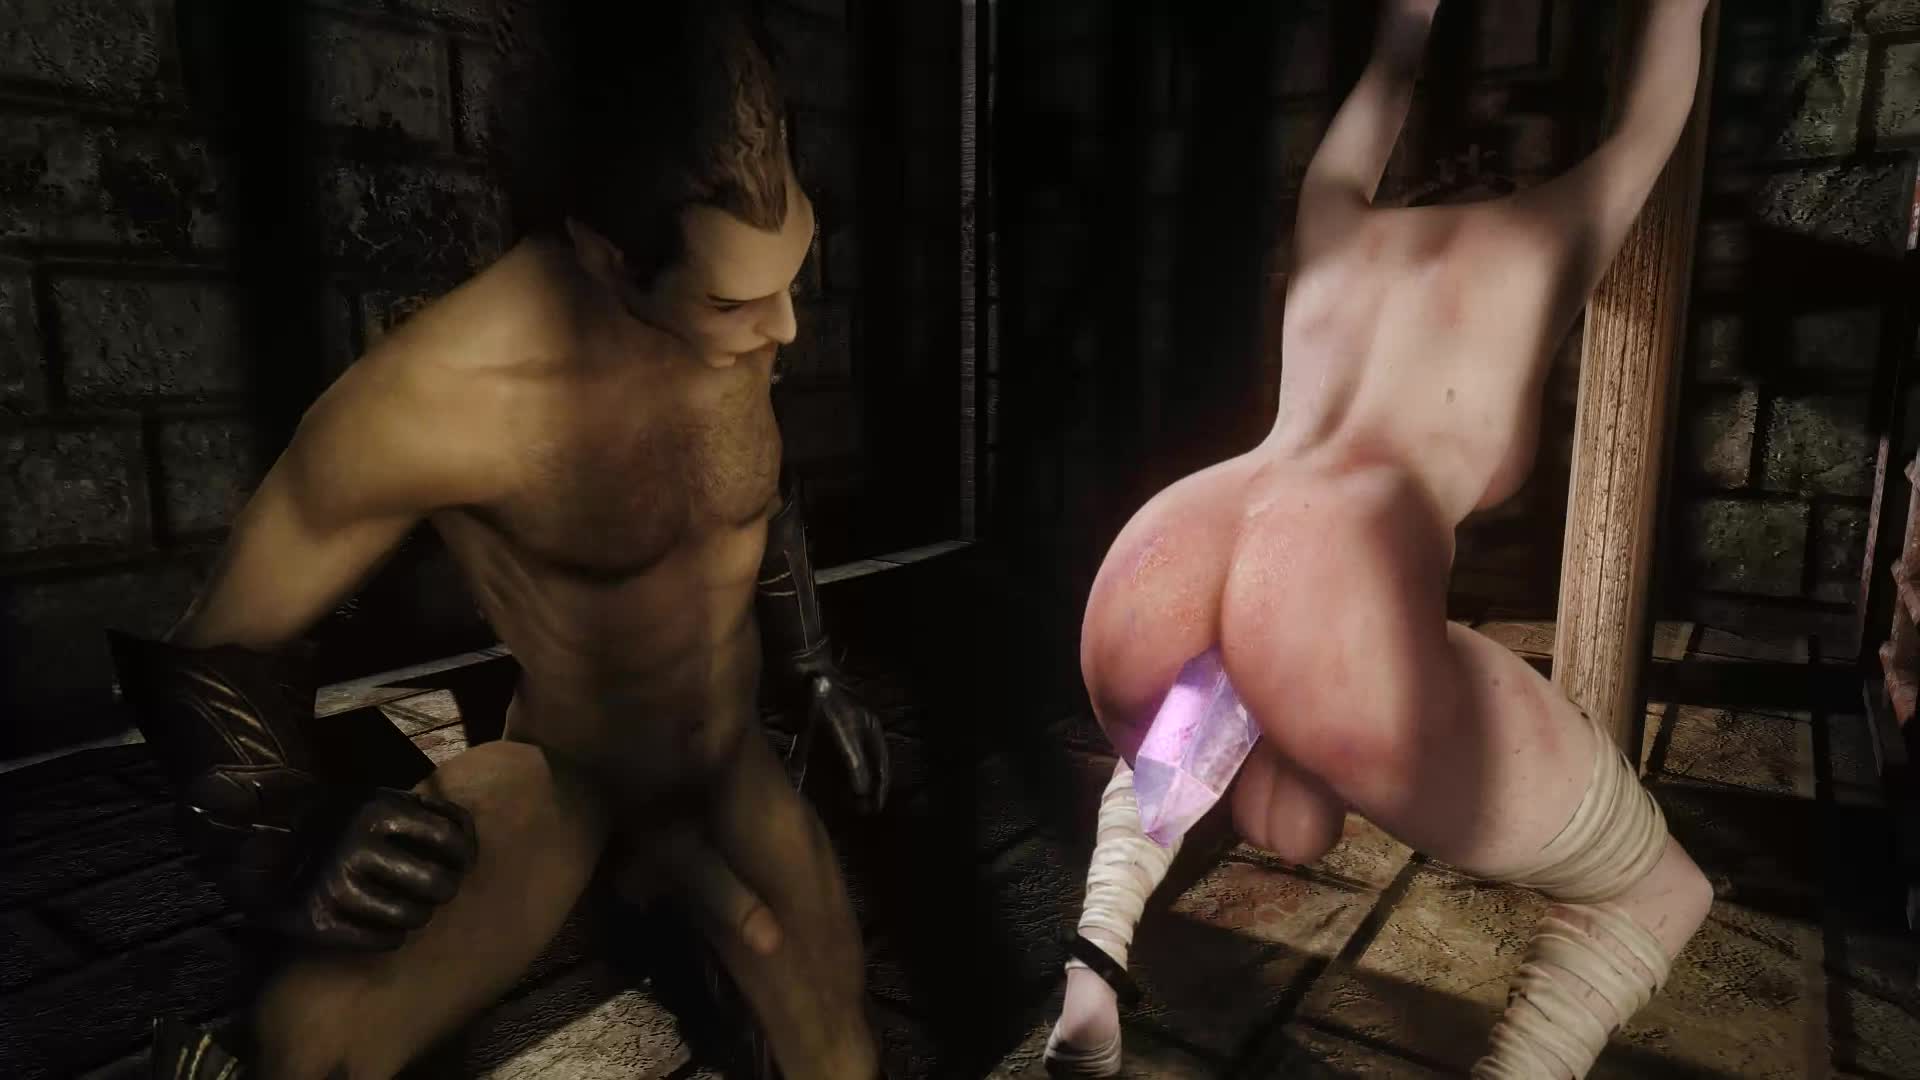 Skyrim Anal Object Insertion 3d. 